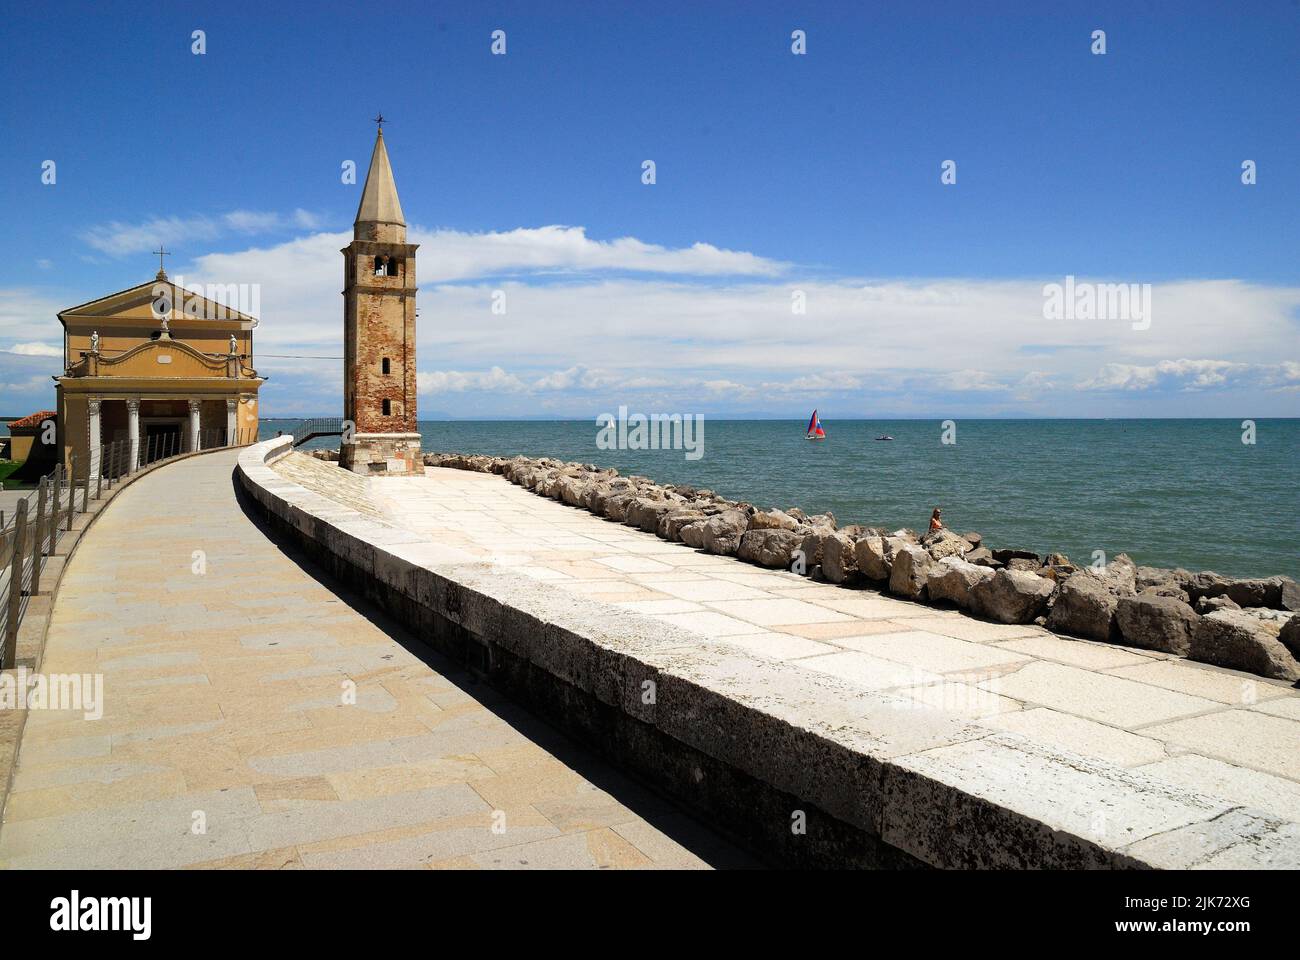 Caorle, Veneto, Italy : the Madonna dell' Angelo church.Caorle is a charming tourist town on the Venetian coast. Stock Photo